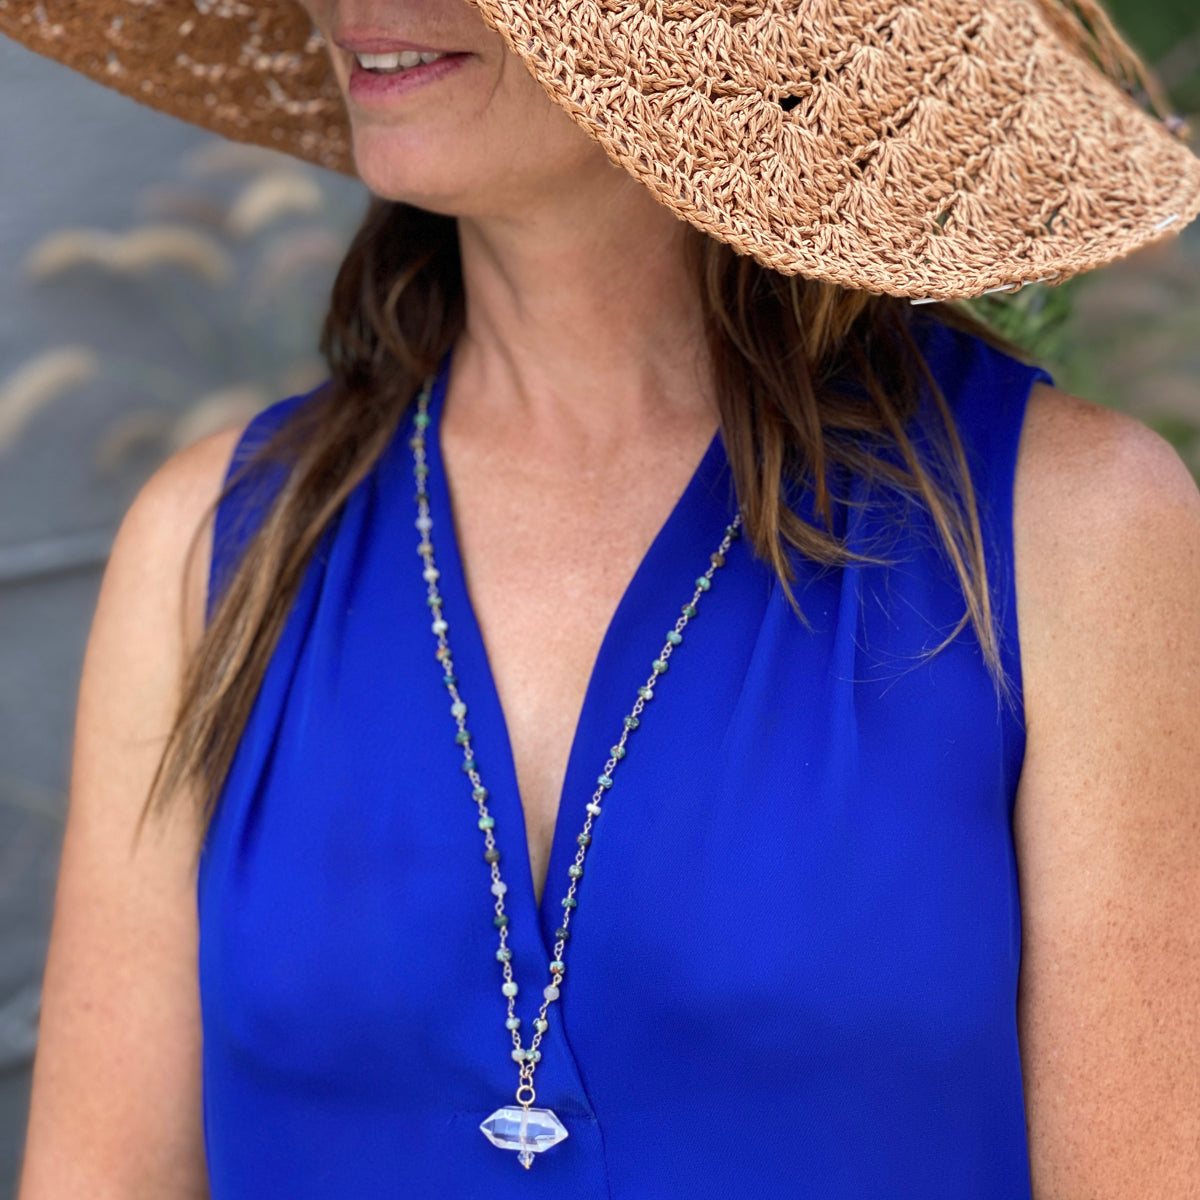 Best crystals for a Happy Life? You found it. Mother Earth Necklace with the Best Healing Crystals for Balanced Life and Happiness. Healing stones, crystals and semi-precious gemstones come from one unified source - Mother Earth. Crystal Energy Necklace.